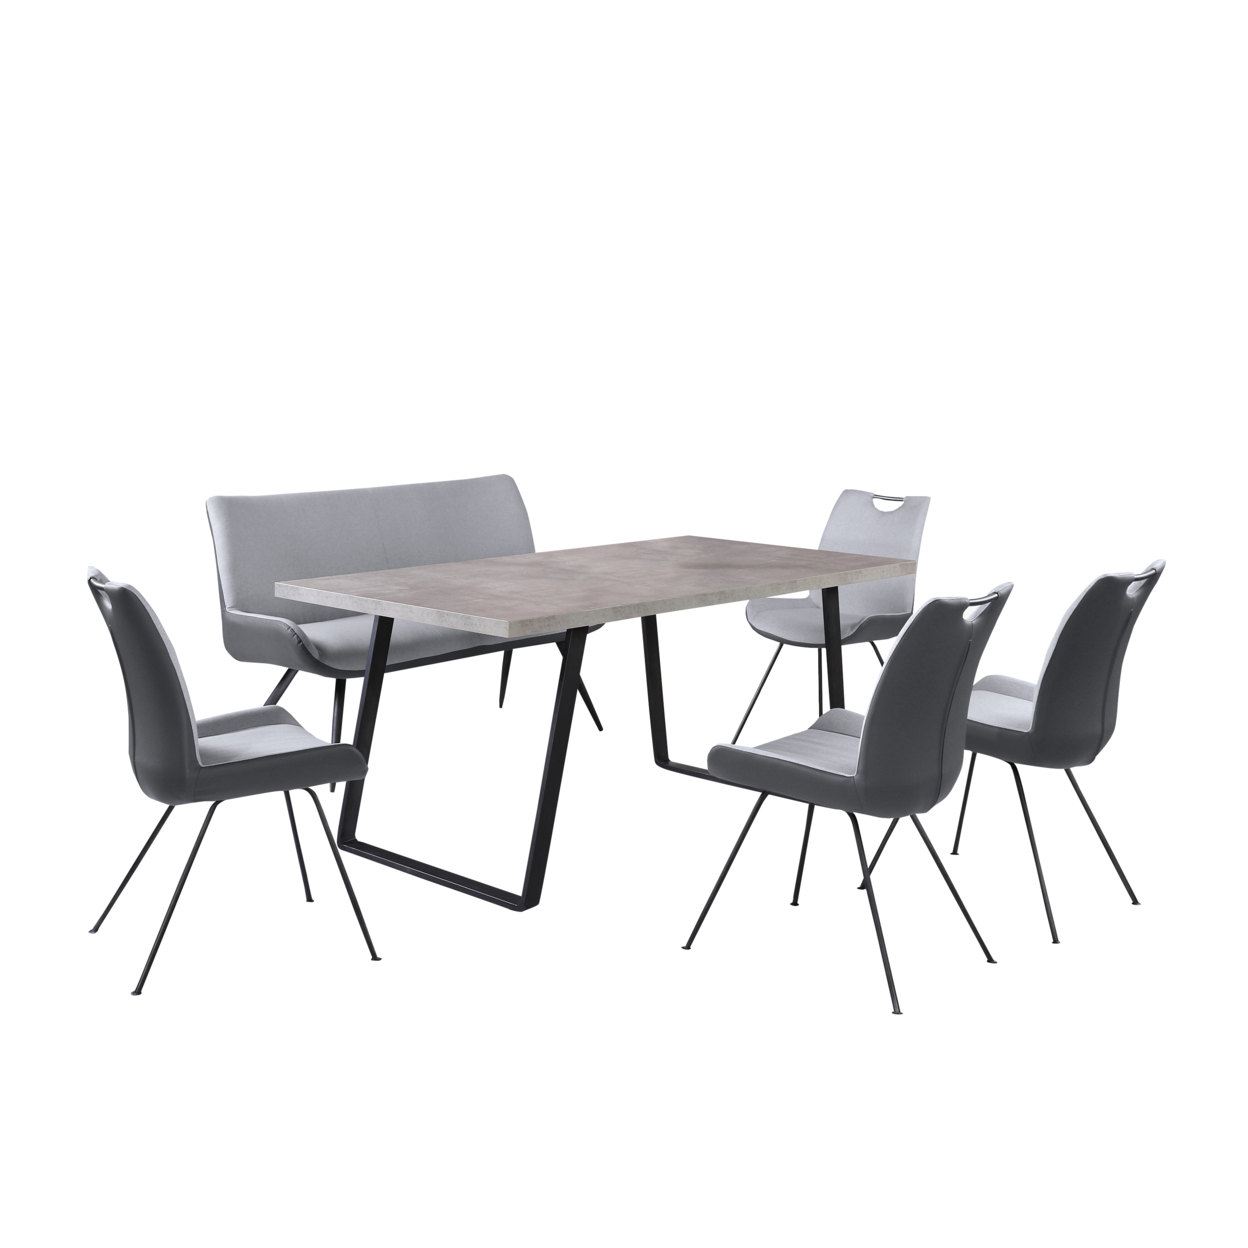 Six Piece Dining Table Set With Metal Base And Fabric Upholstery, Gray- Saltoro Sherpi